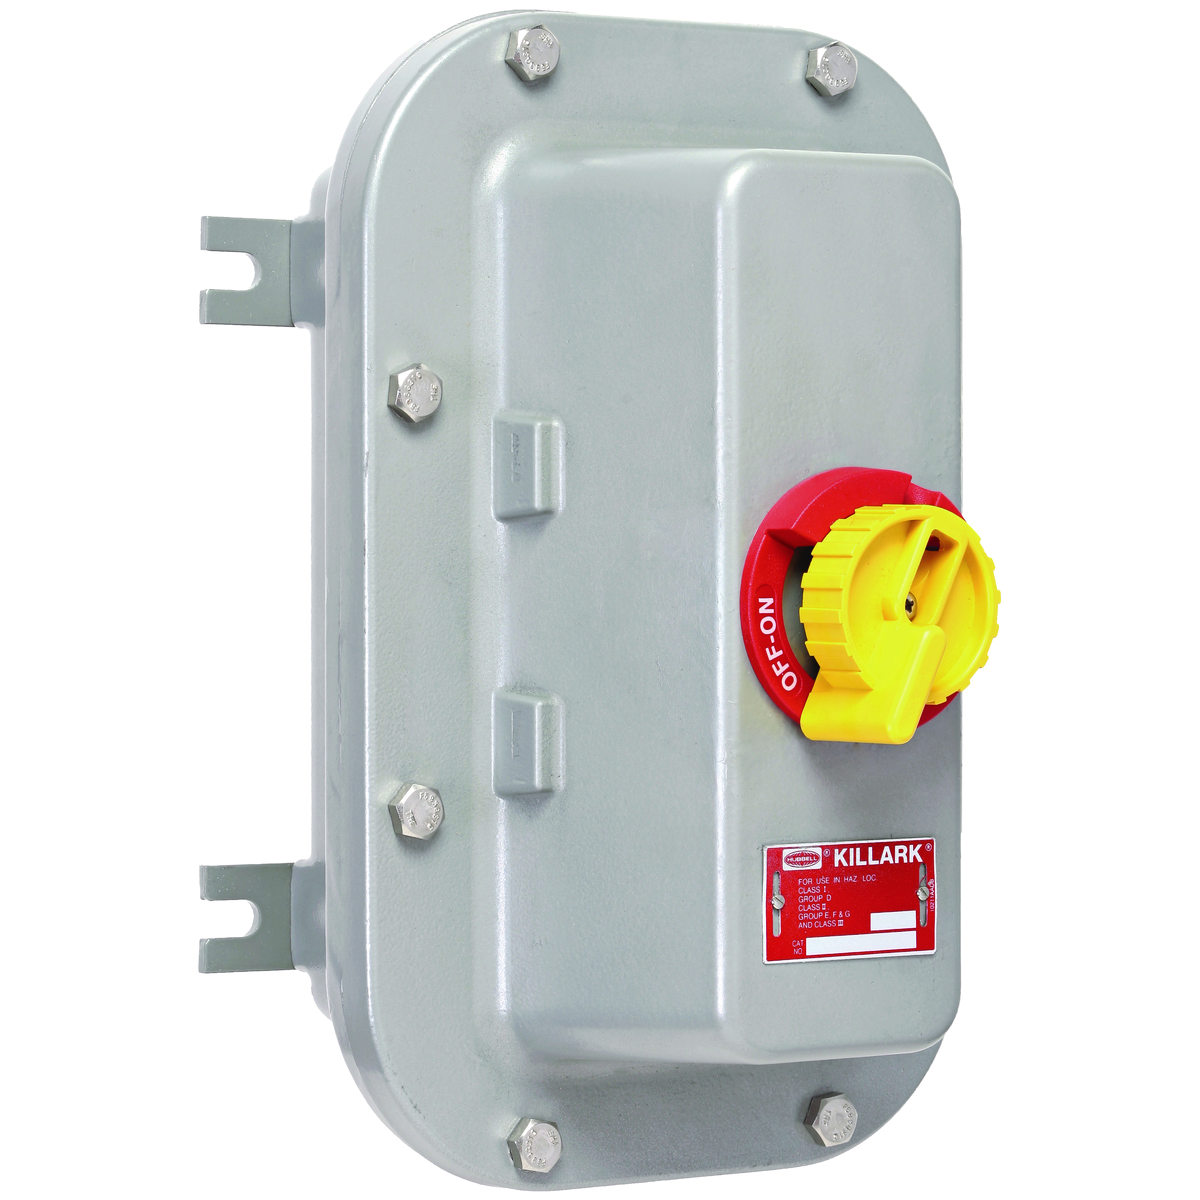 B7NFD SERIES - ALUMINUM FEED-THRU COMPACT NON-FUSED DISCONNECT SWITCHENCLOSURE WITH ABB SWITCH - 100A/3P/600VAC/50HP MAX